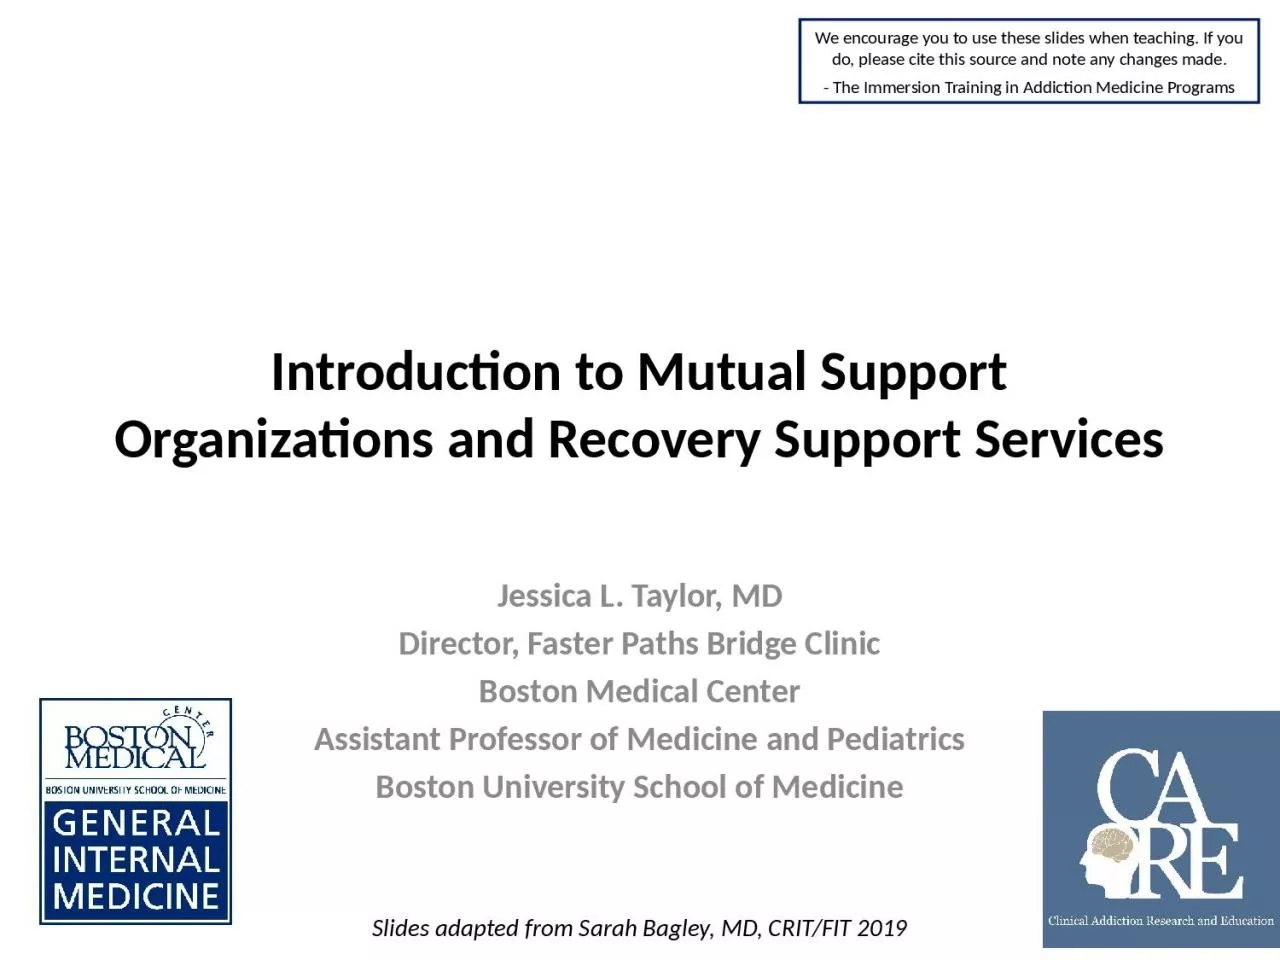 Introduction to Mutual Support Organizations and Recovery Support Services